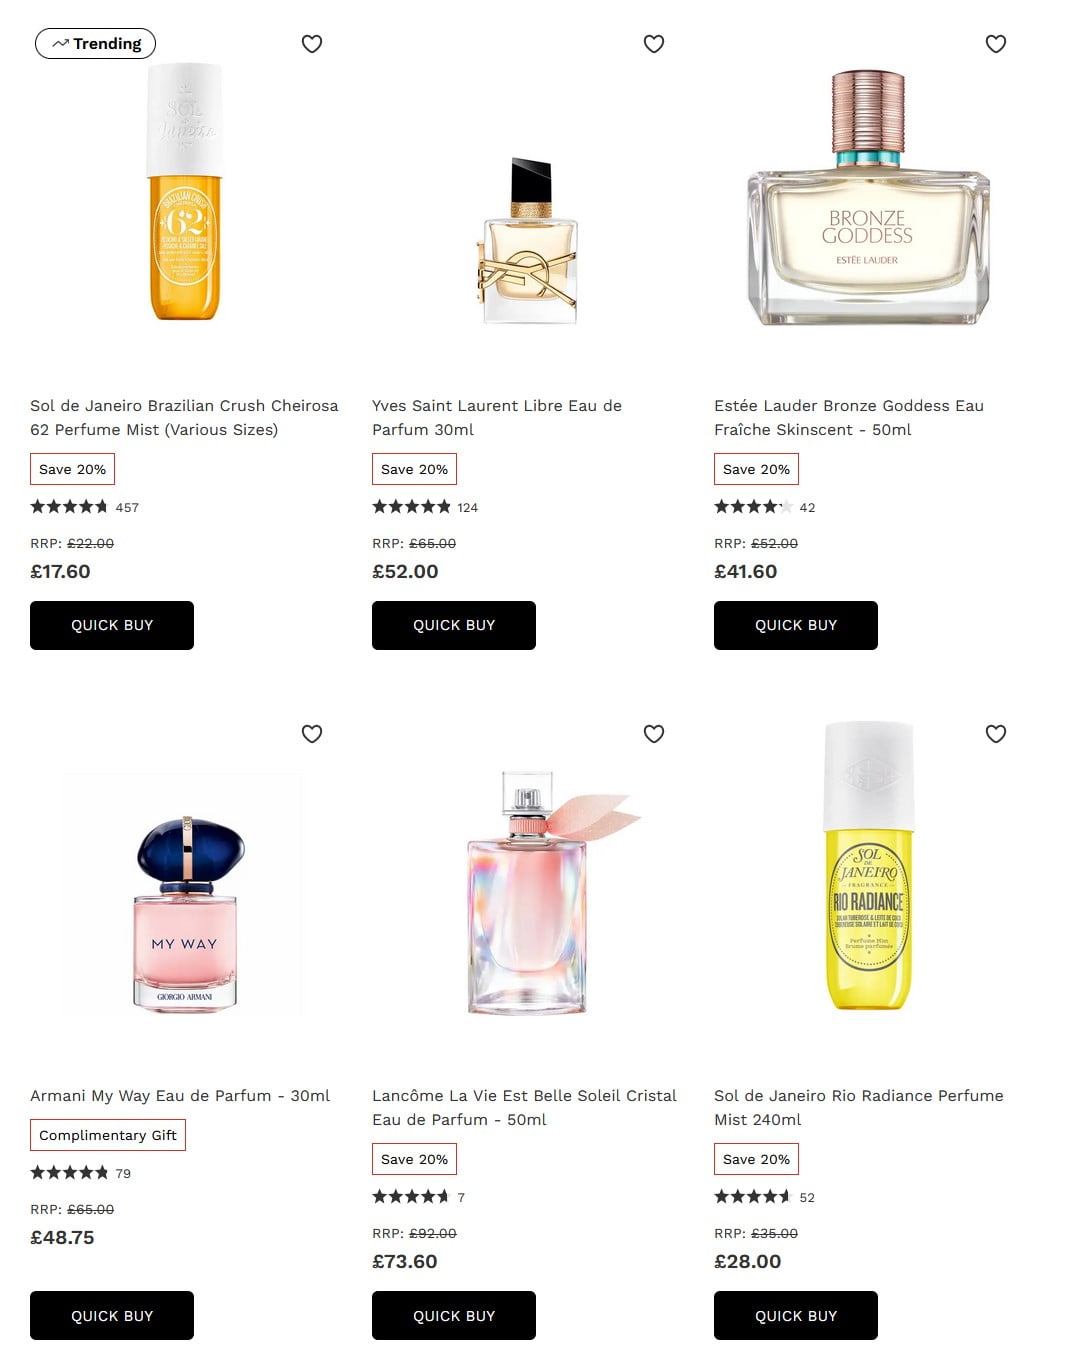 Up to 20% off selected summer scents